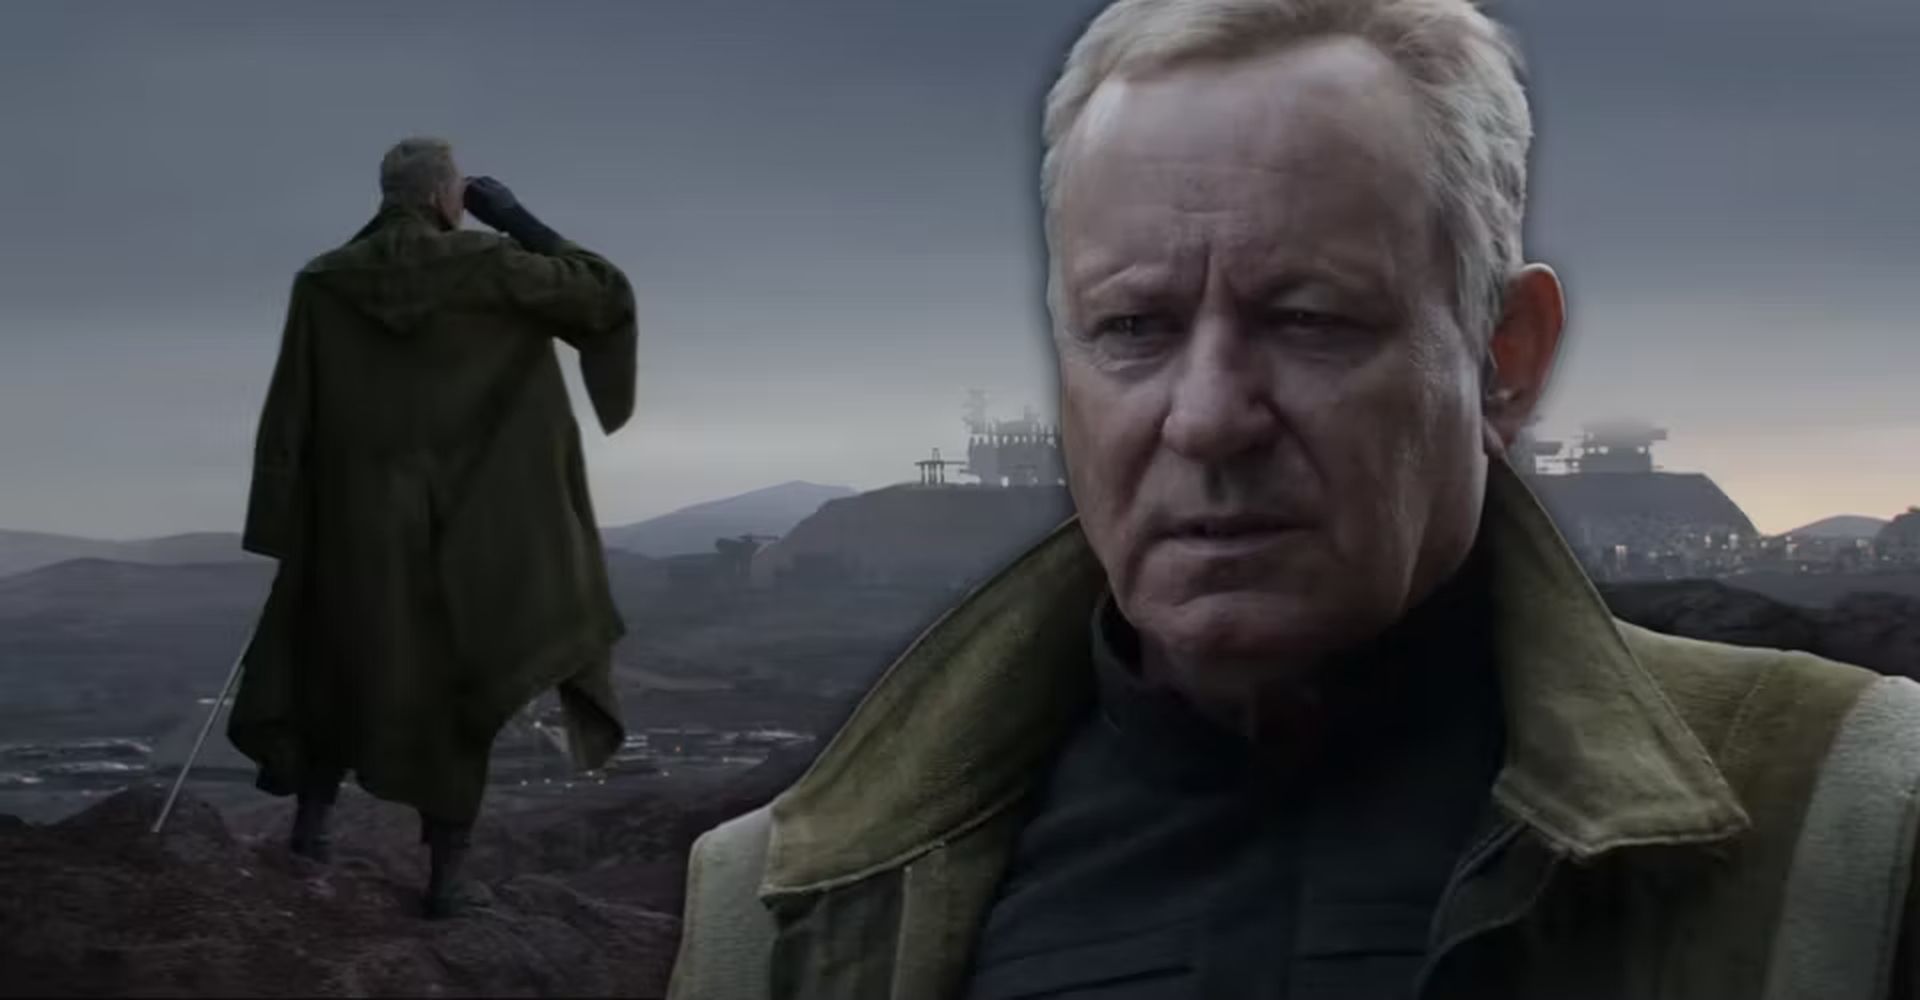 In this article, we are going to be covering which character in Star Wars Andor is Stellan Skarsgard, as the Swedish actor once again works with Disney.